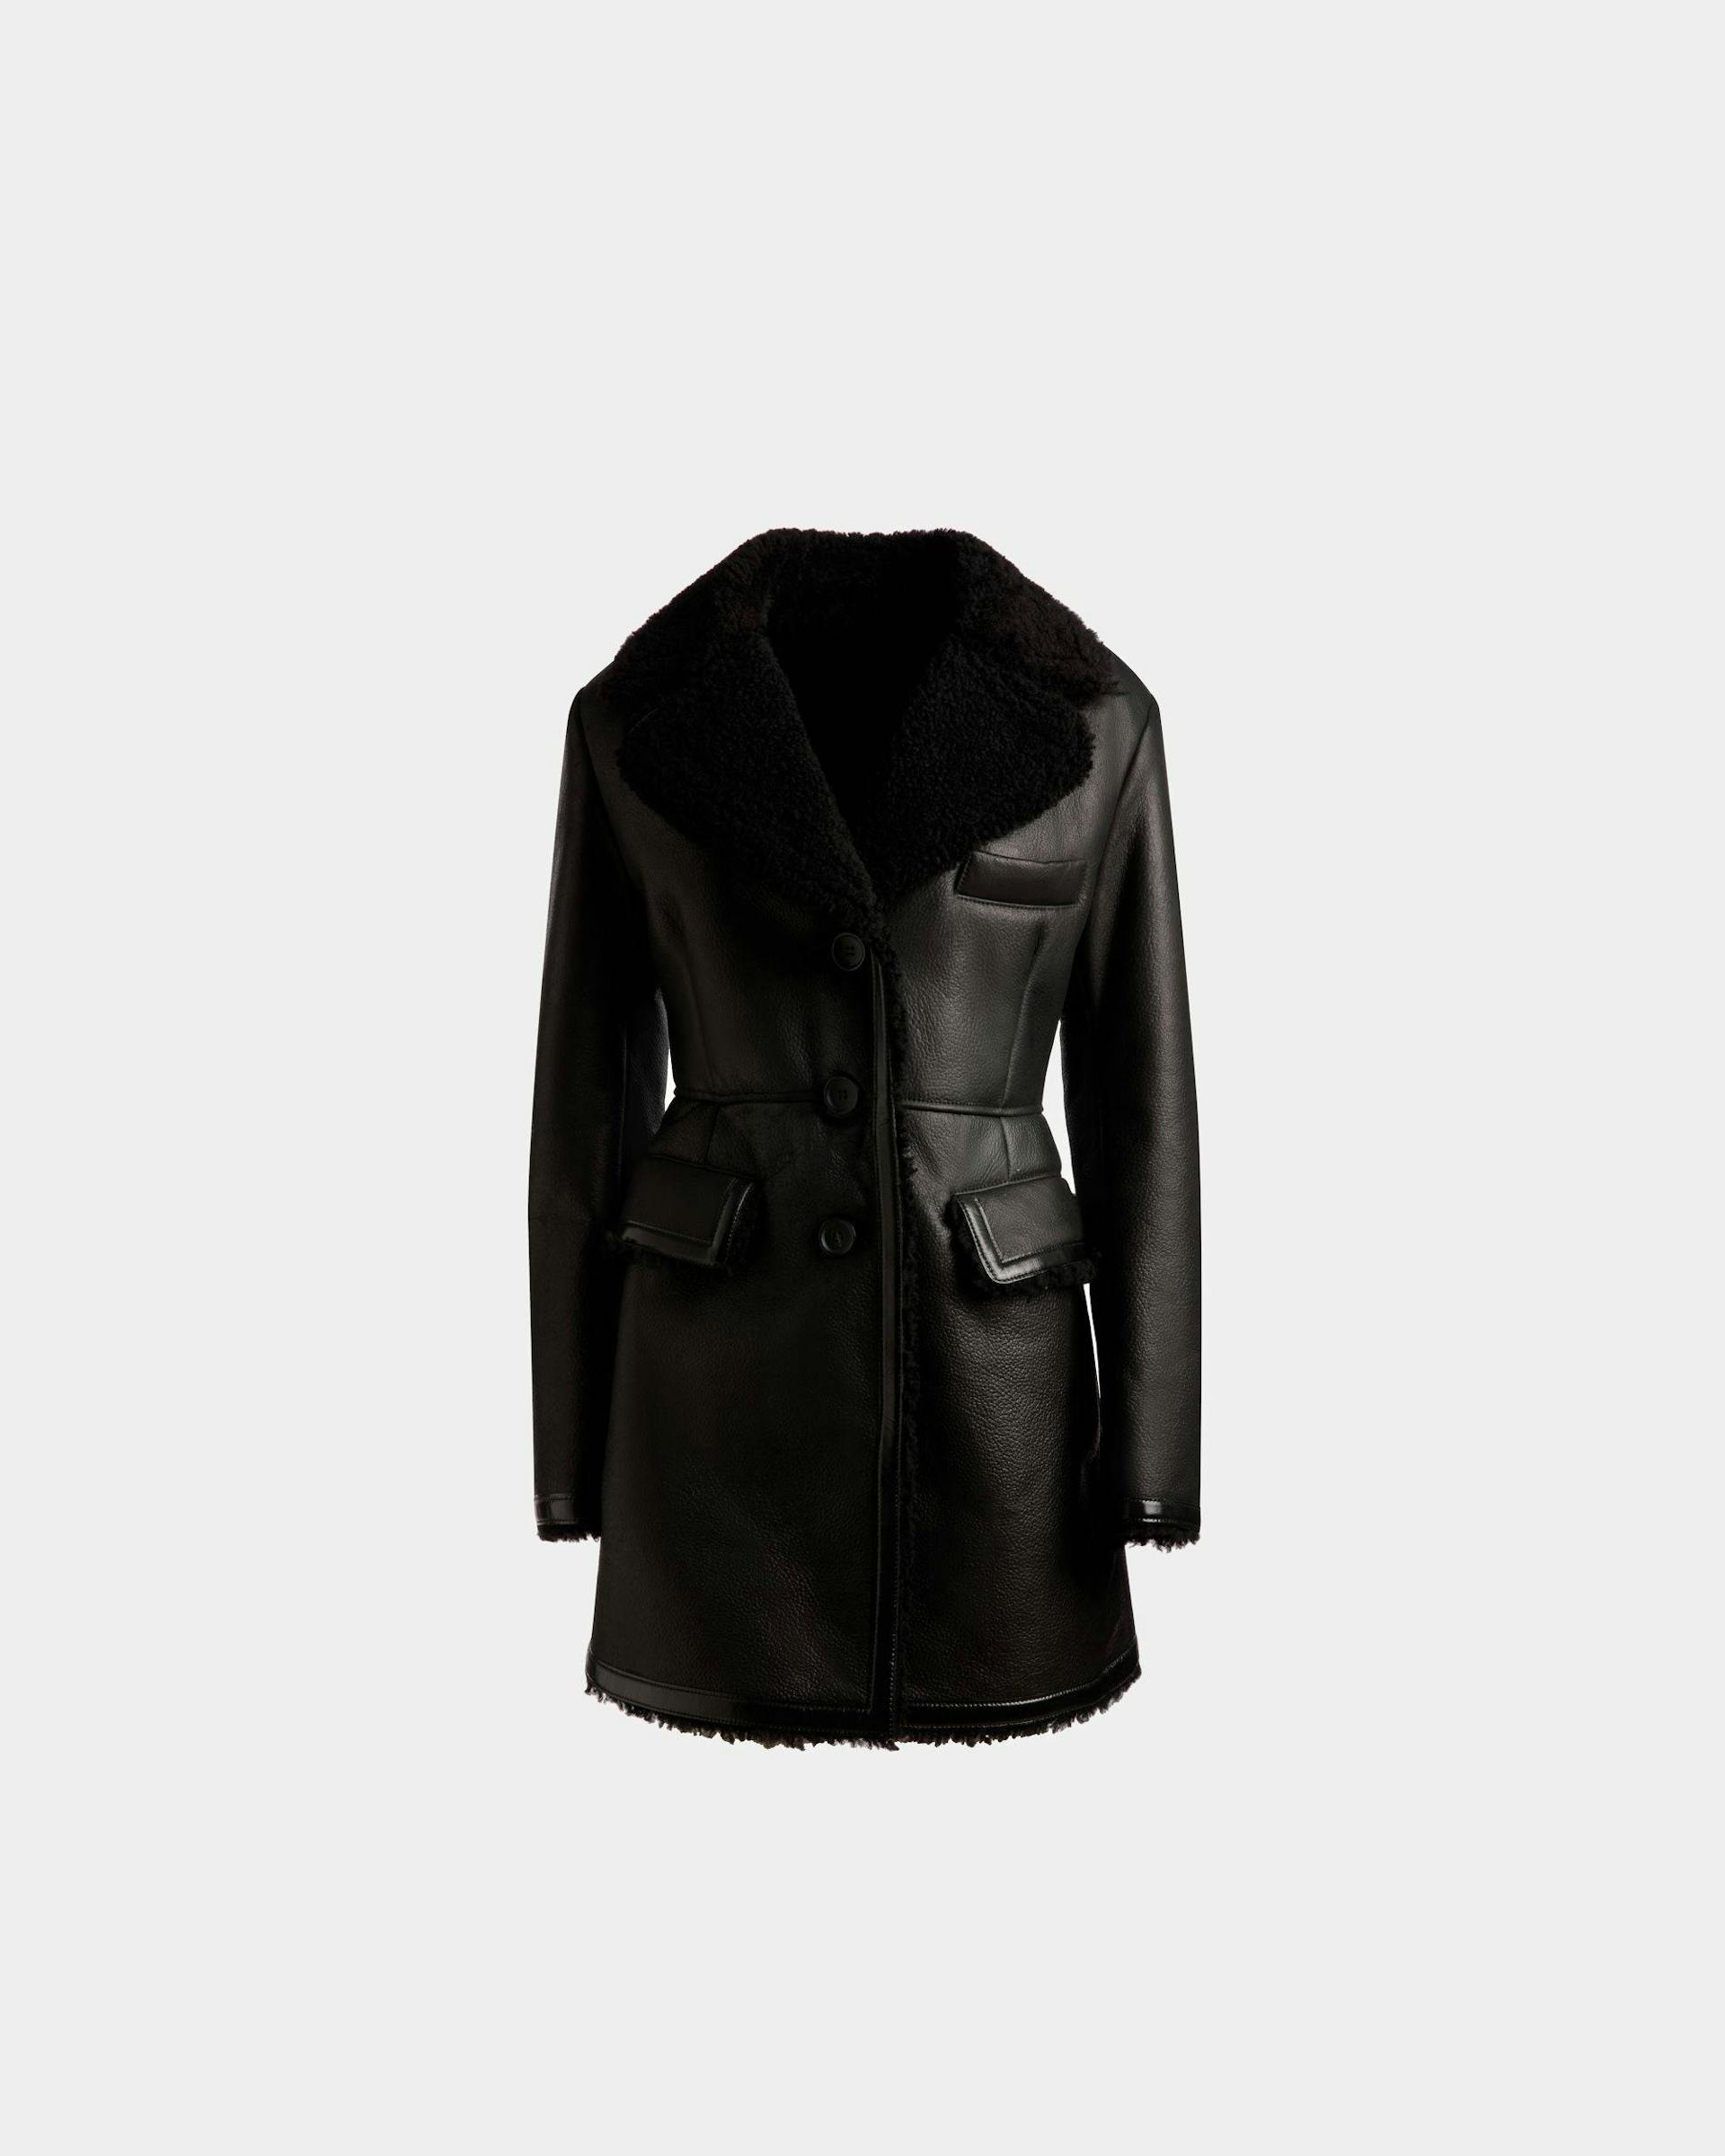 Women's Wool-lined Coat In Black Leather | Bally | Still Life Front